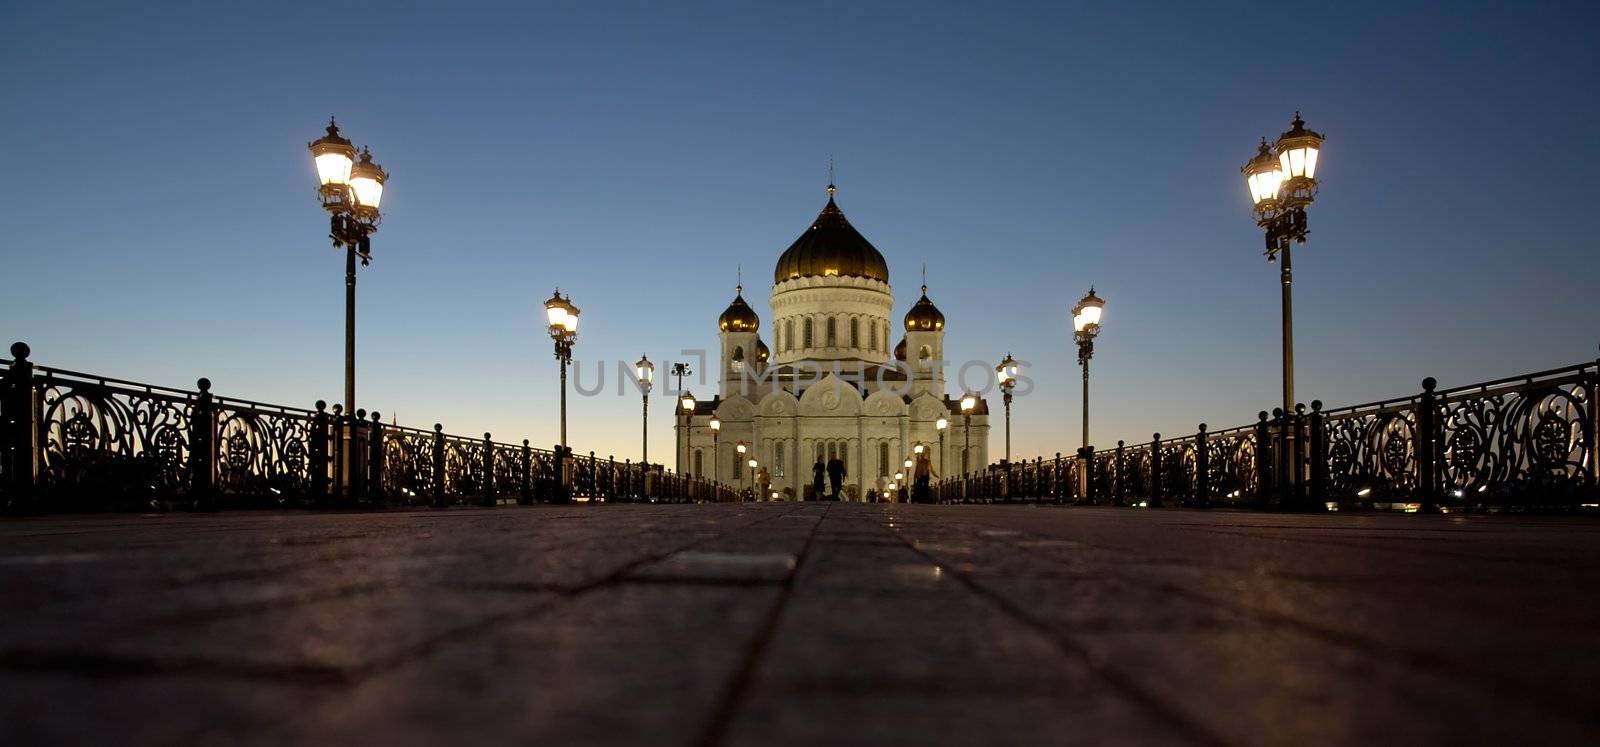 The Cathedral of Christ the Savior has arisen out of the ashes in all of its' glory right in the heart of Moscow.